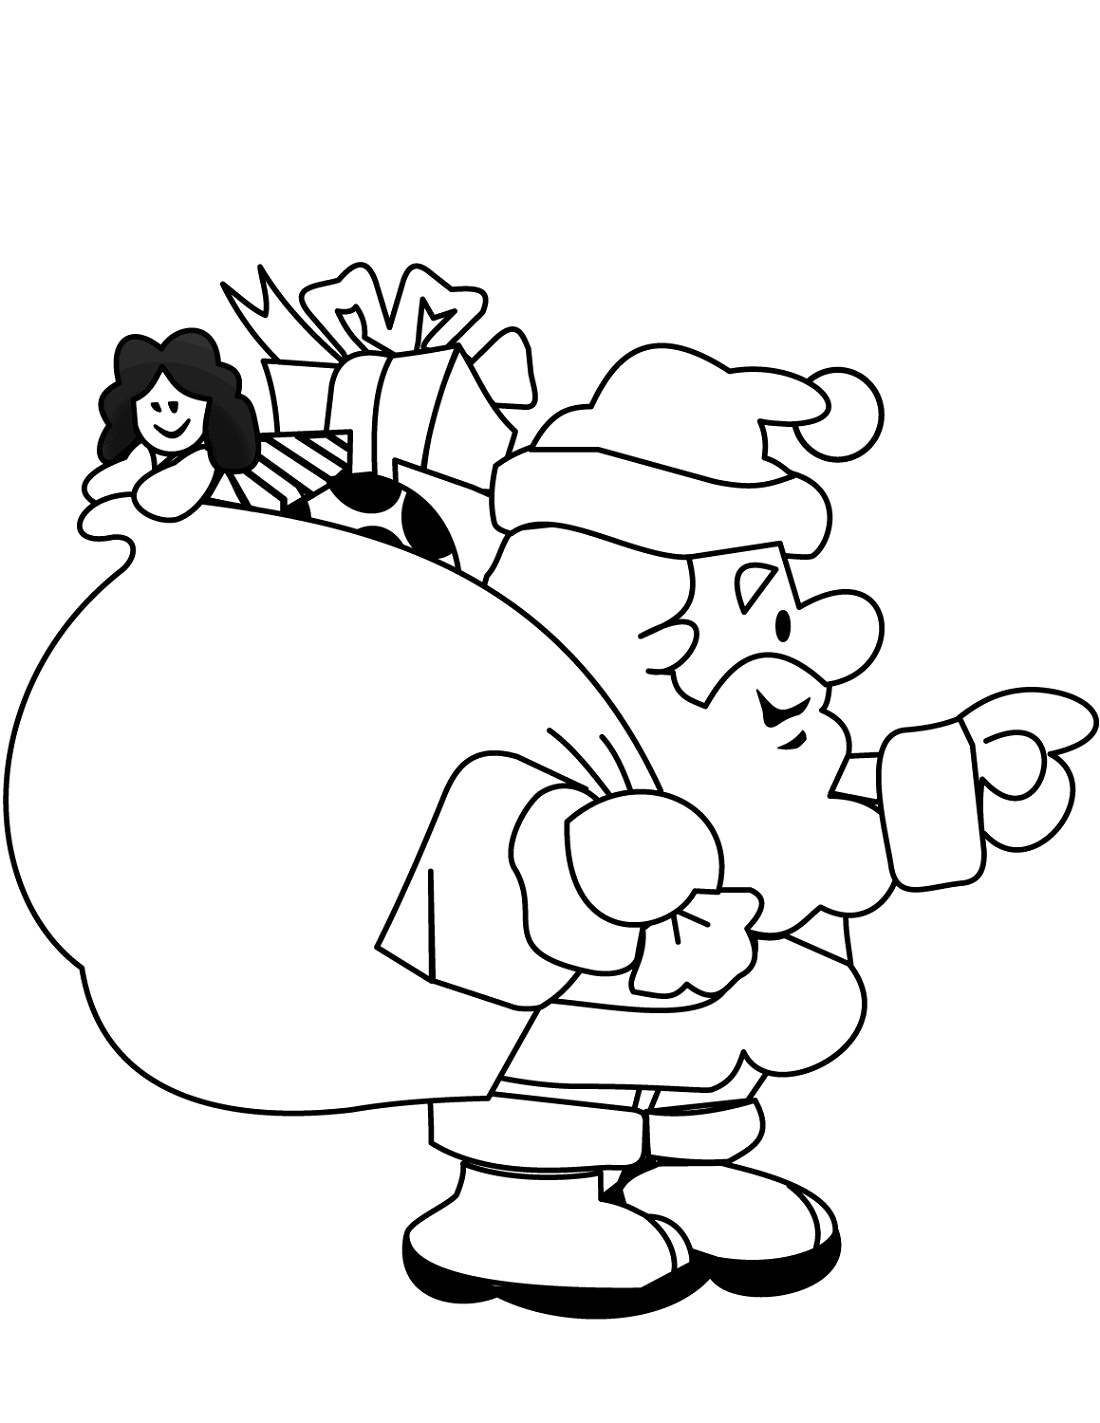 Santa Claus Coloring Pages With Big Gift Bag